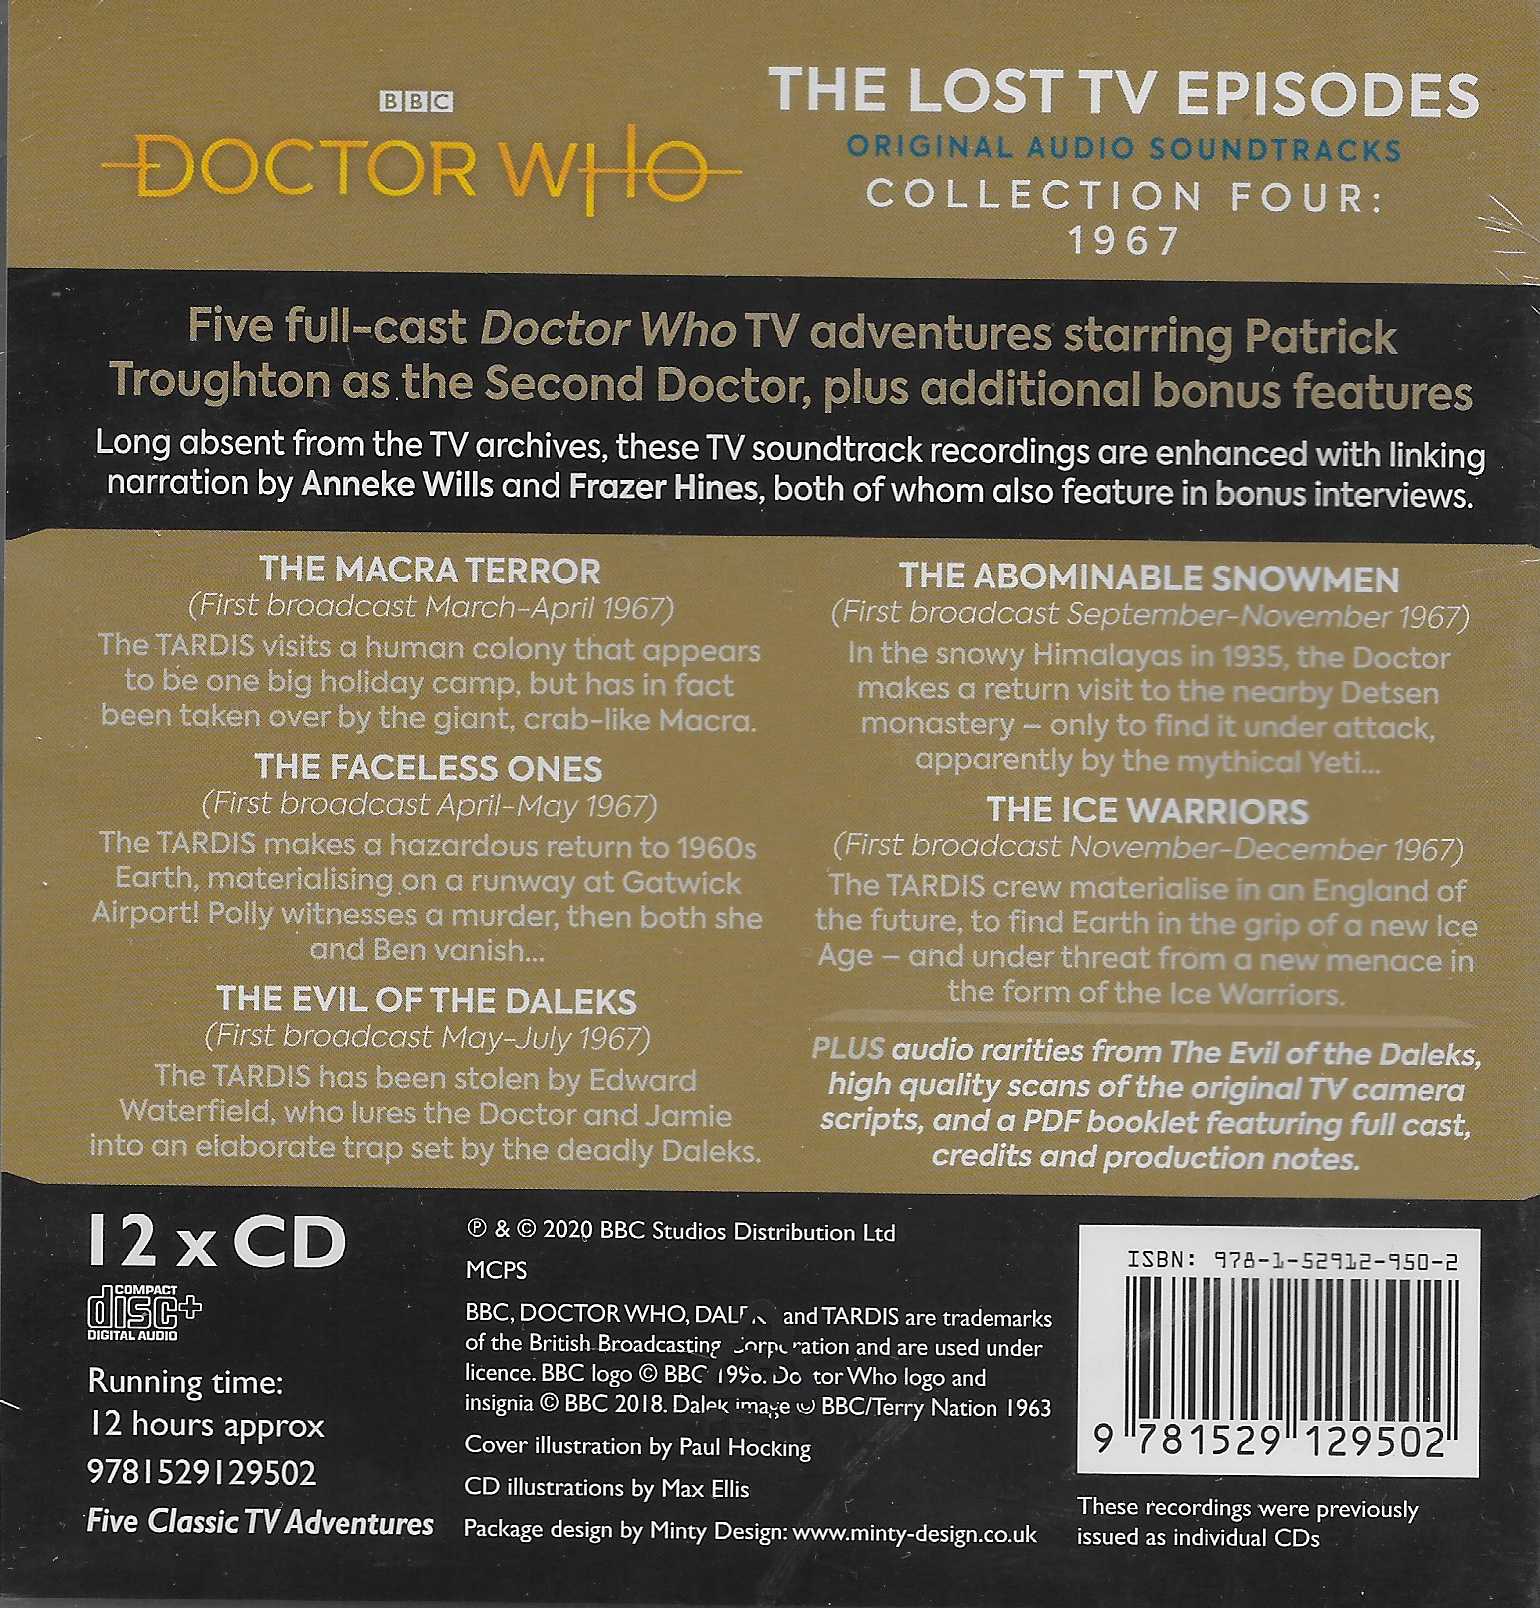 Picture of ISBN 978-1-52912-950-2 Doctor Who - The lost TV episodes - Collection four: 1967 by artist Various from the BBC records and Tapes library